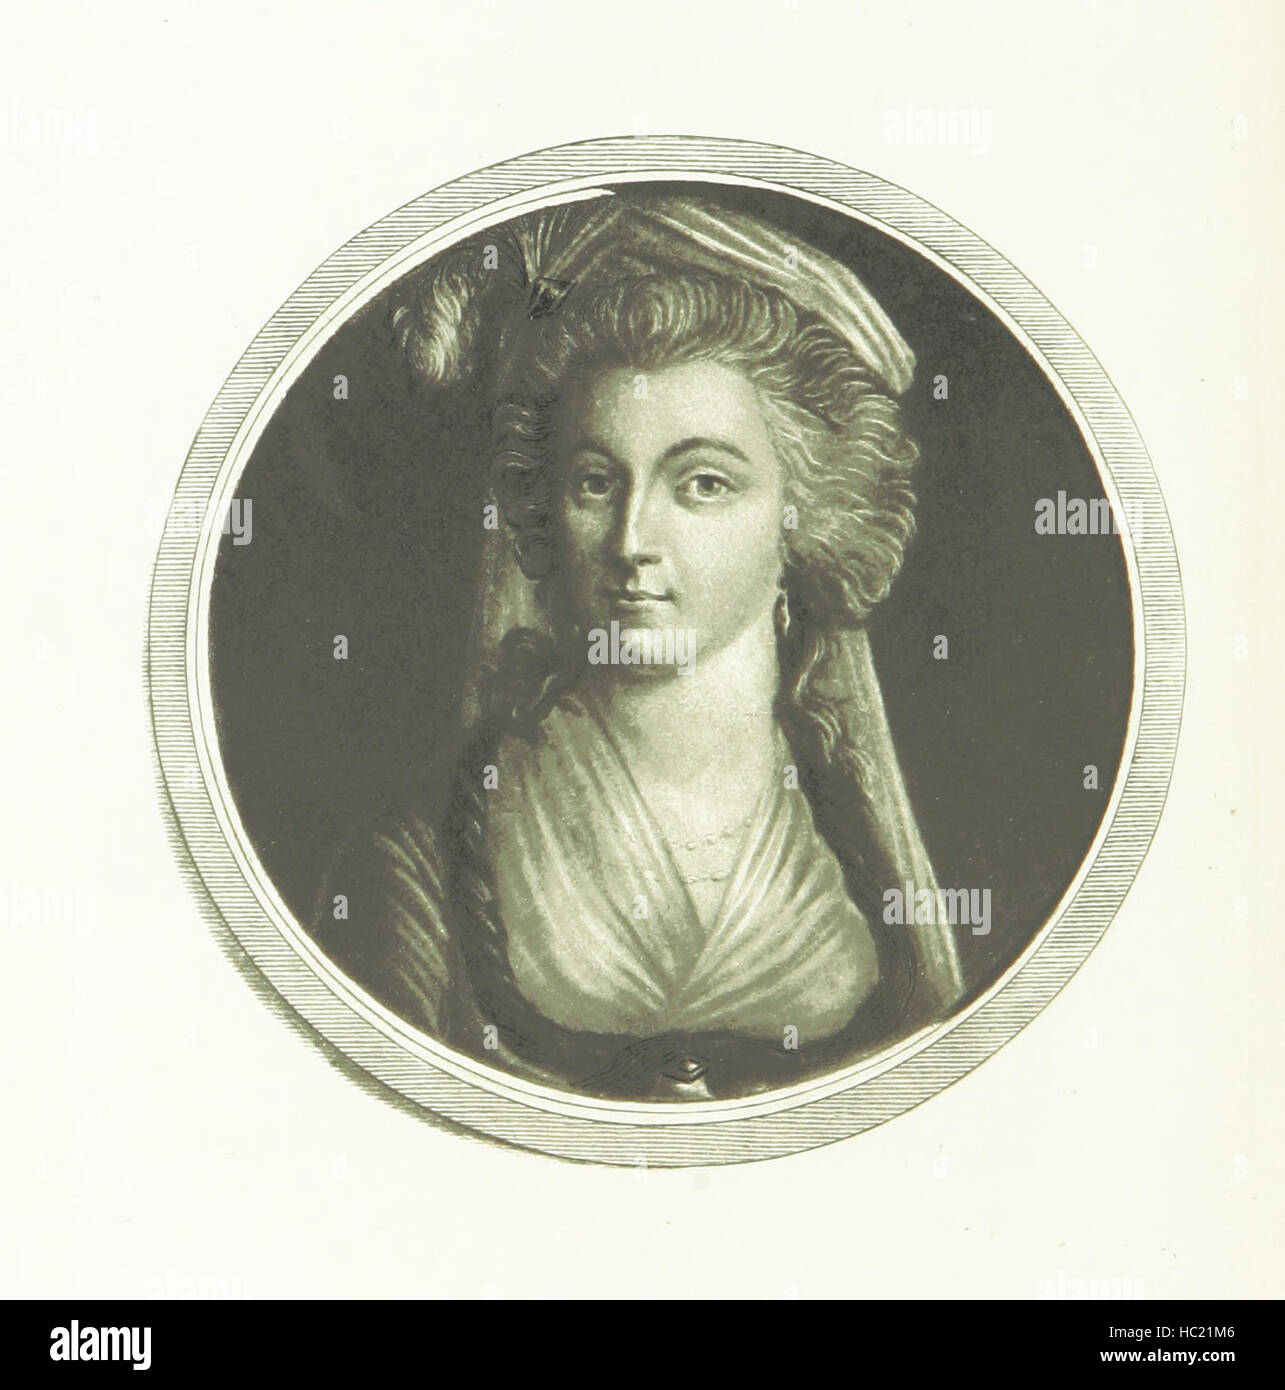 Image taken from page 48 of 'A Metrical History of the Life and Times of Napoleon Bonaparte. A collection of poems and songs ... selected and arranged with introductory notes and connecting narrative ... With ... illustrations' Image taken from page 48 of 'A Metrical History of Stock Photo